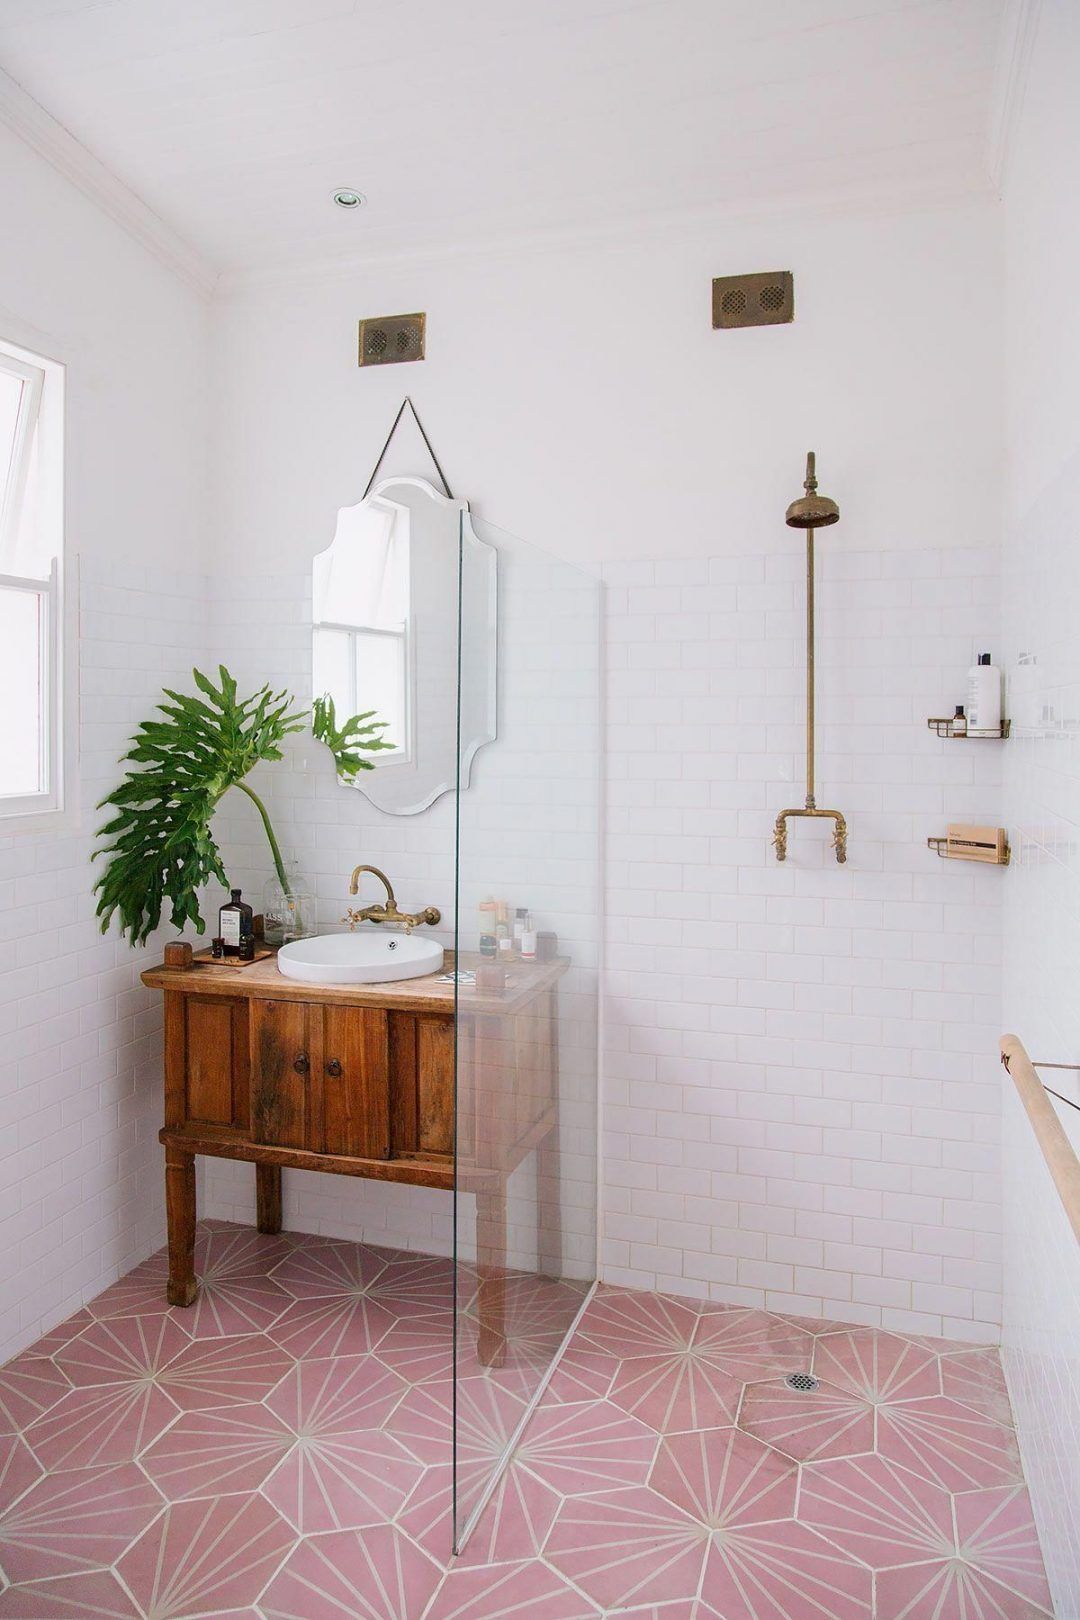 25 Tranquil Scandinavian Bathroom Decor To Get Rid Of Daily Stress - N11